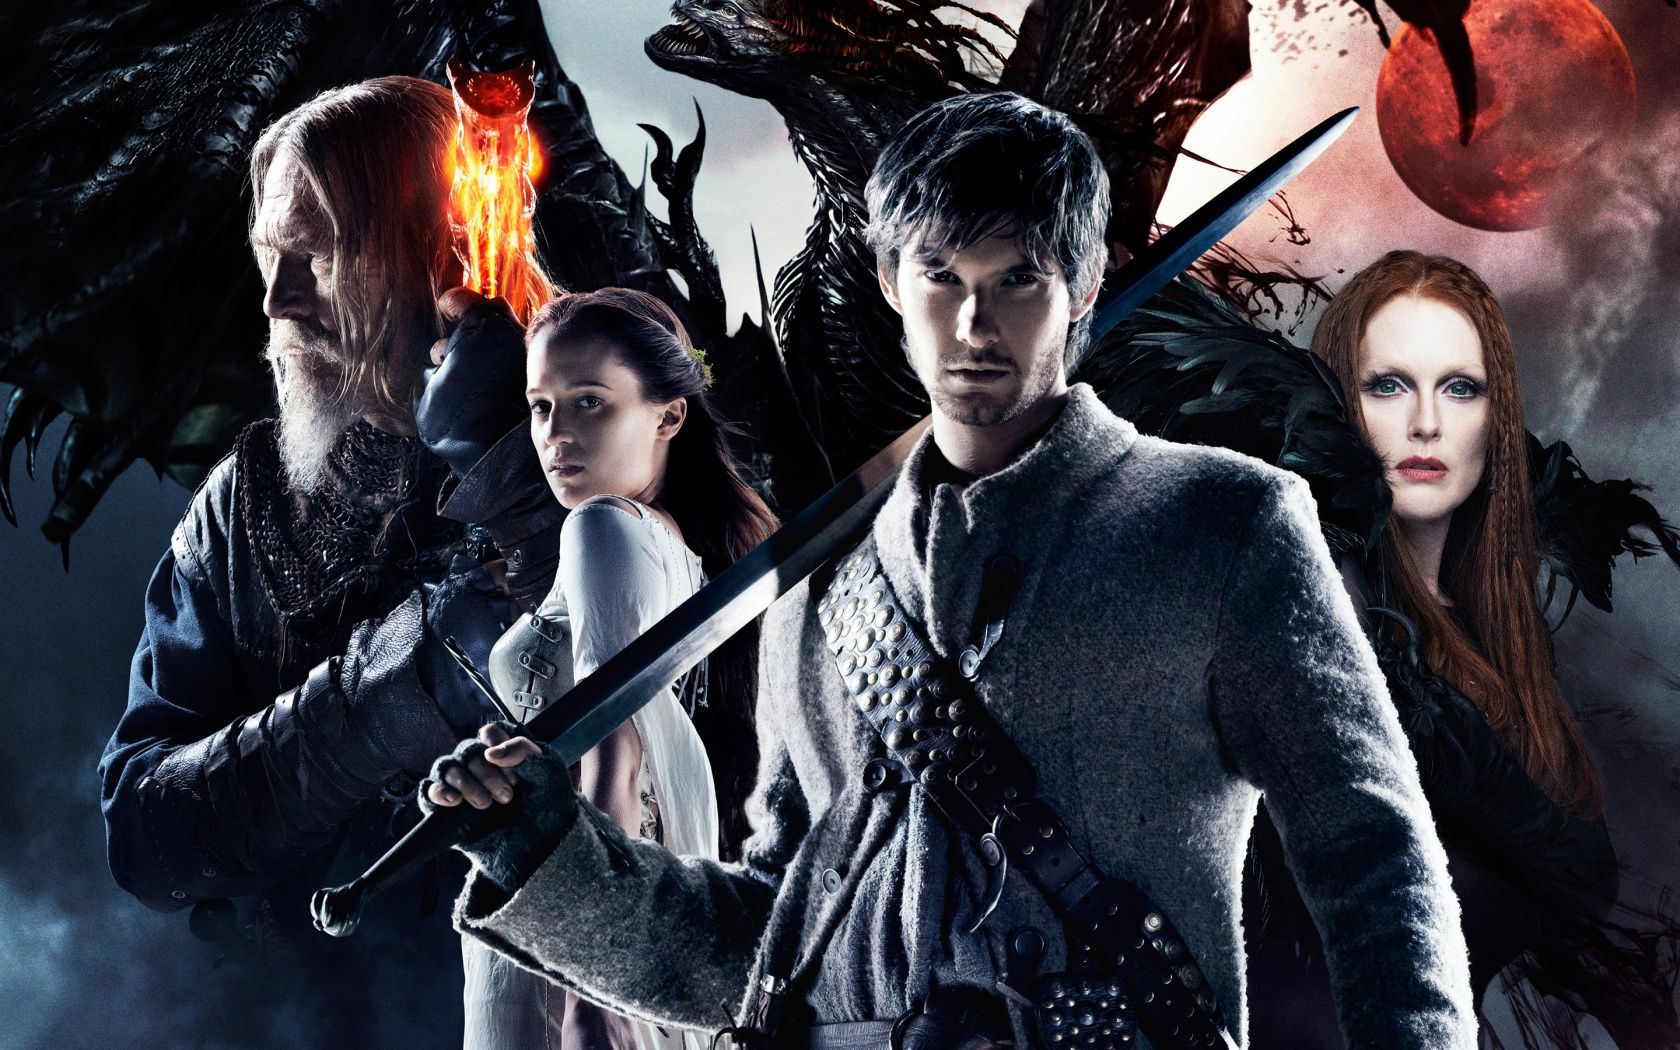 Seventh Son Movie Wallpaper in jpg format for free download